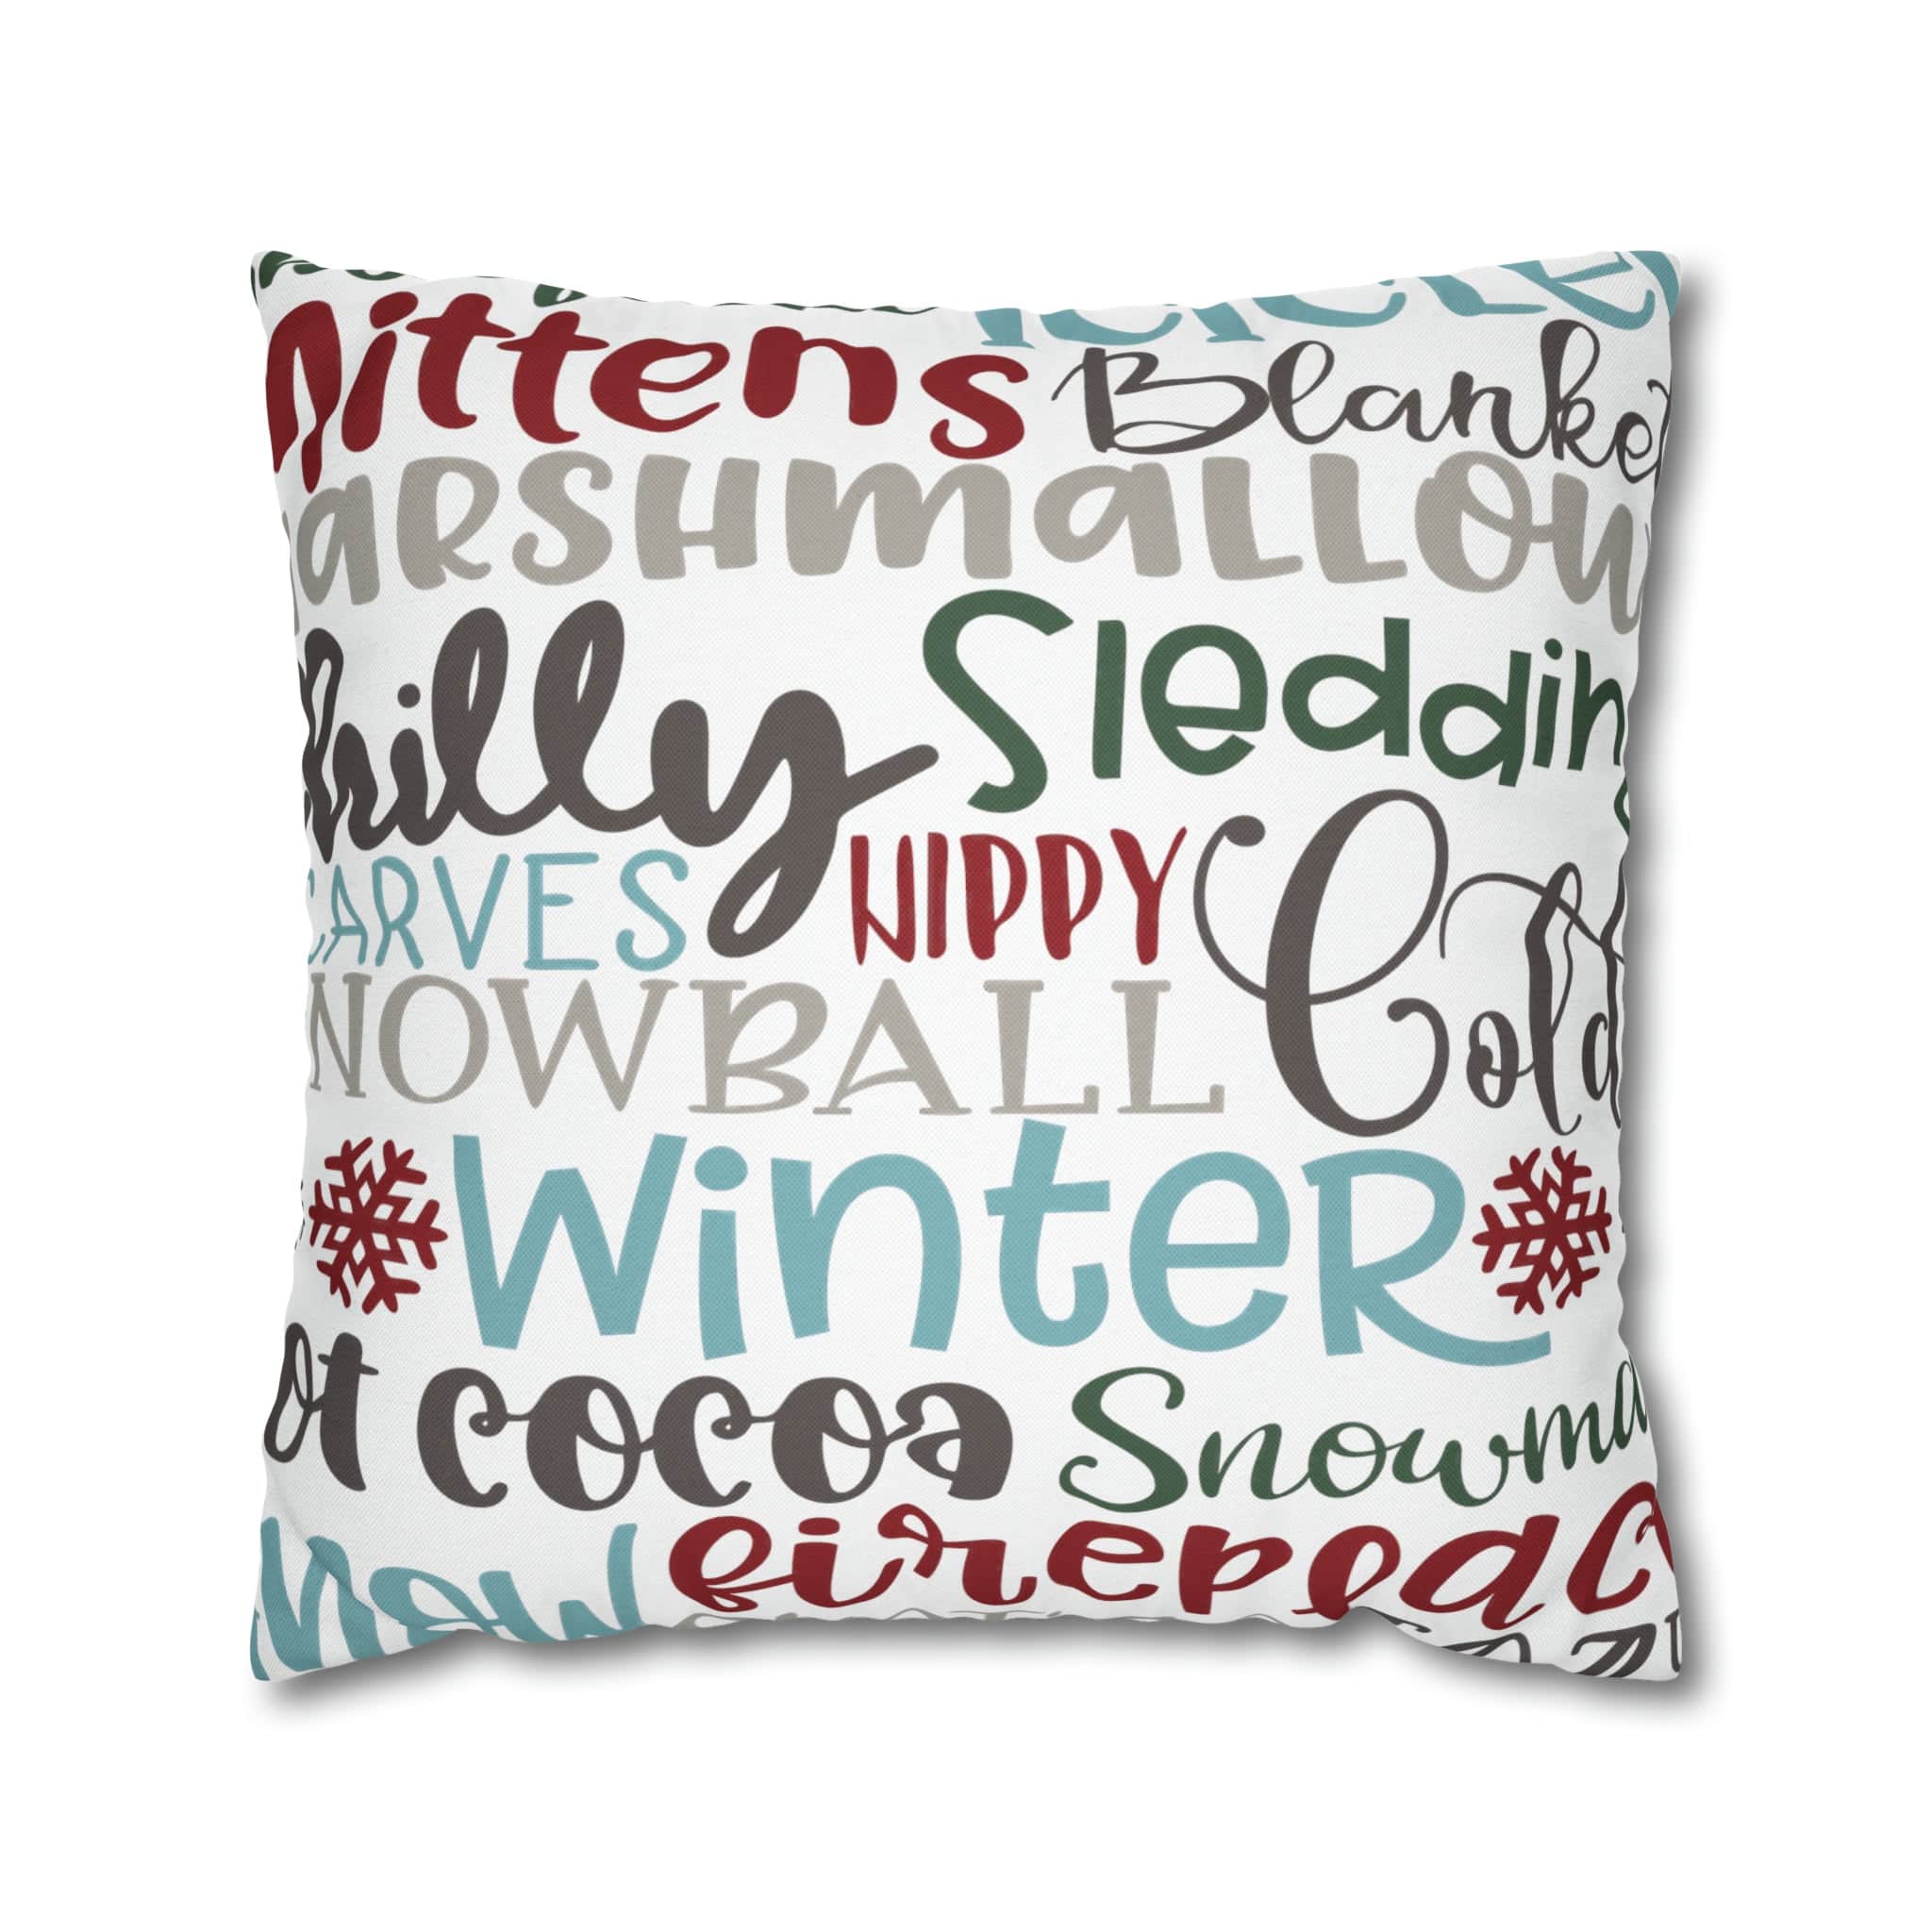 Kate McEnroe New York Christmas Throw Pillow Cover, Mittens, Mashmallows, Snowballs, Sledding, Chilly Winter Word Art Cushion Covers, Farmhouse DecorThrow Pillow Covers21100937173206648652